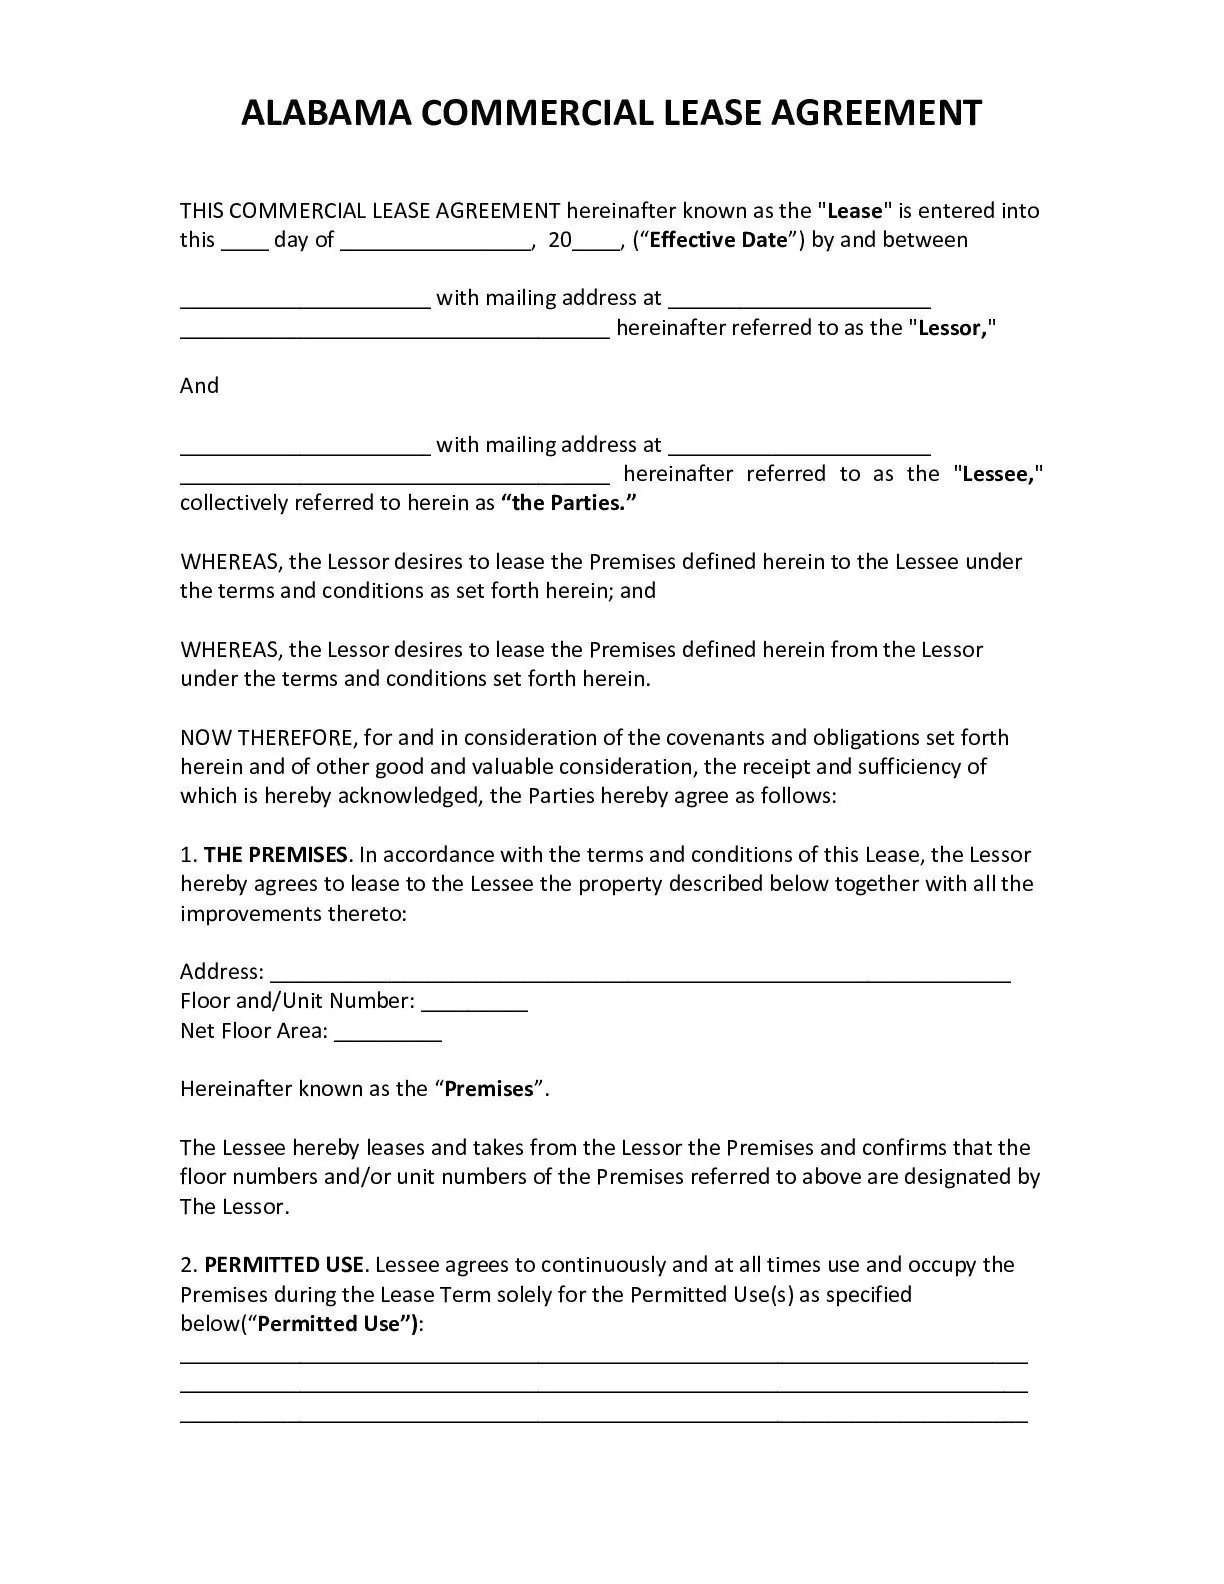 official alabama commercial lease agreement 2021 pdf form